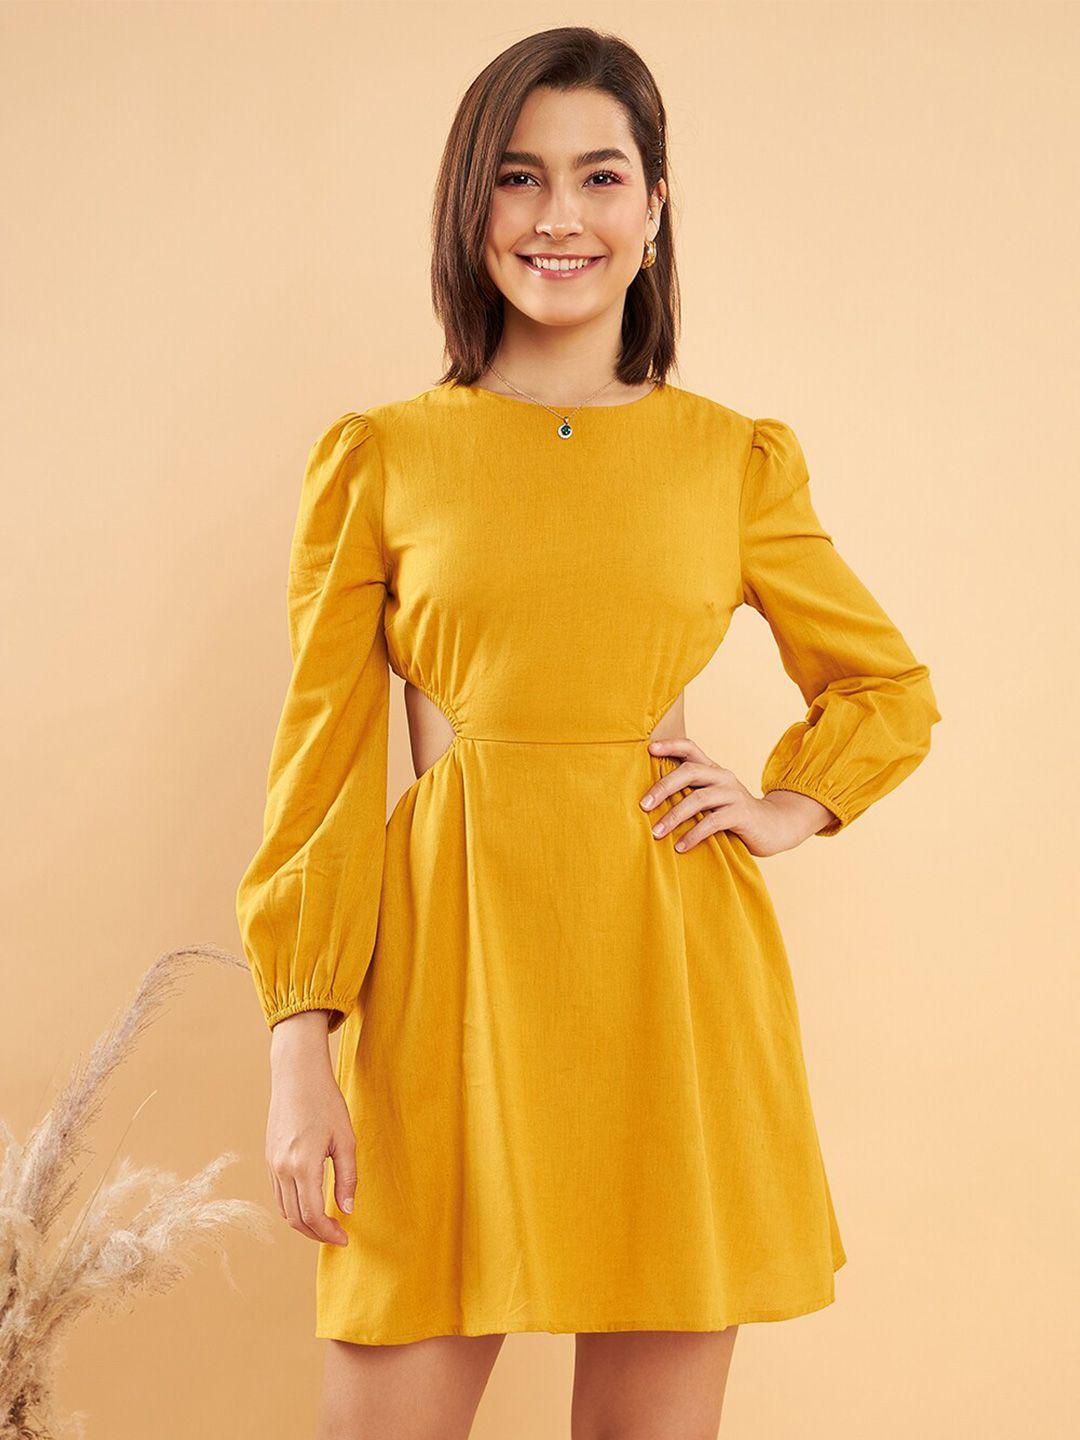 kassually-mustard-yellow-puff-sleeves-cut-out-detail-pure-cotton-fit-&-flare-dress